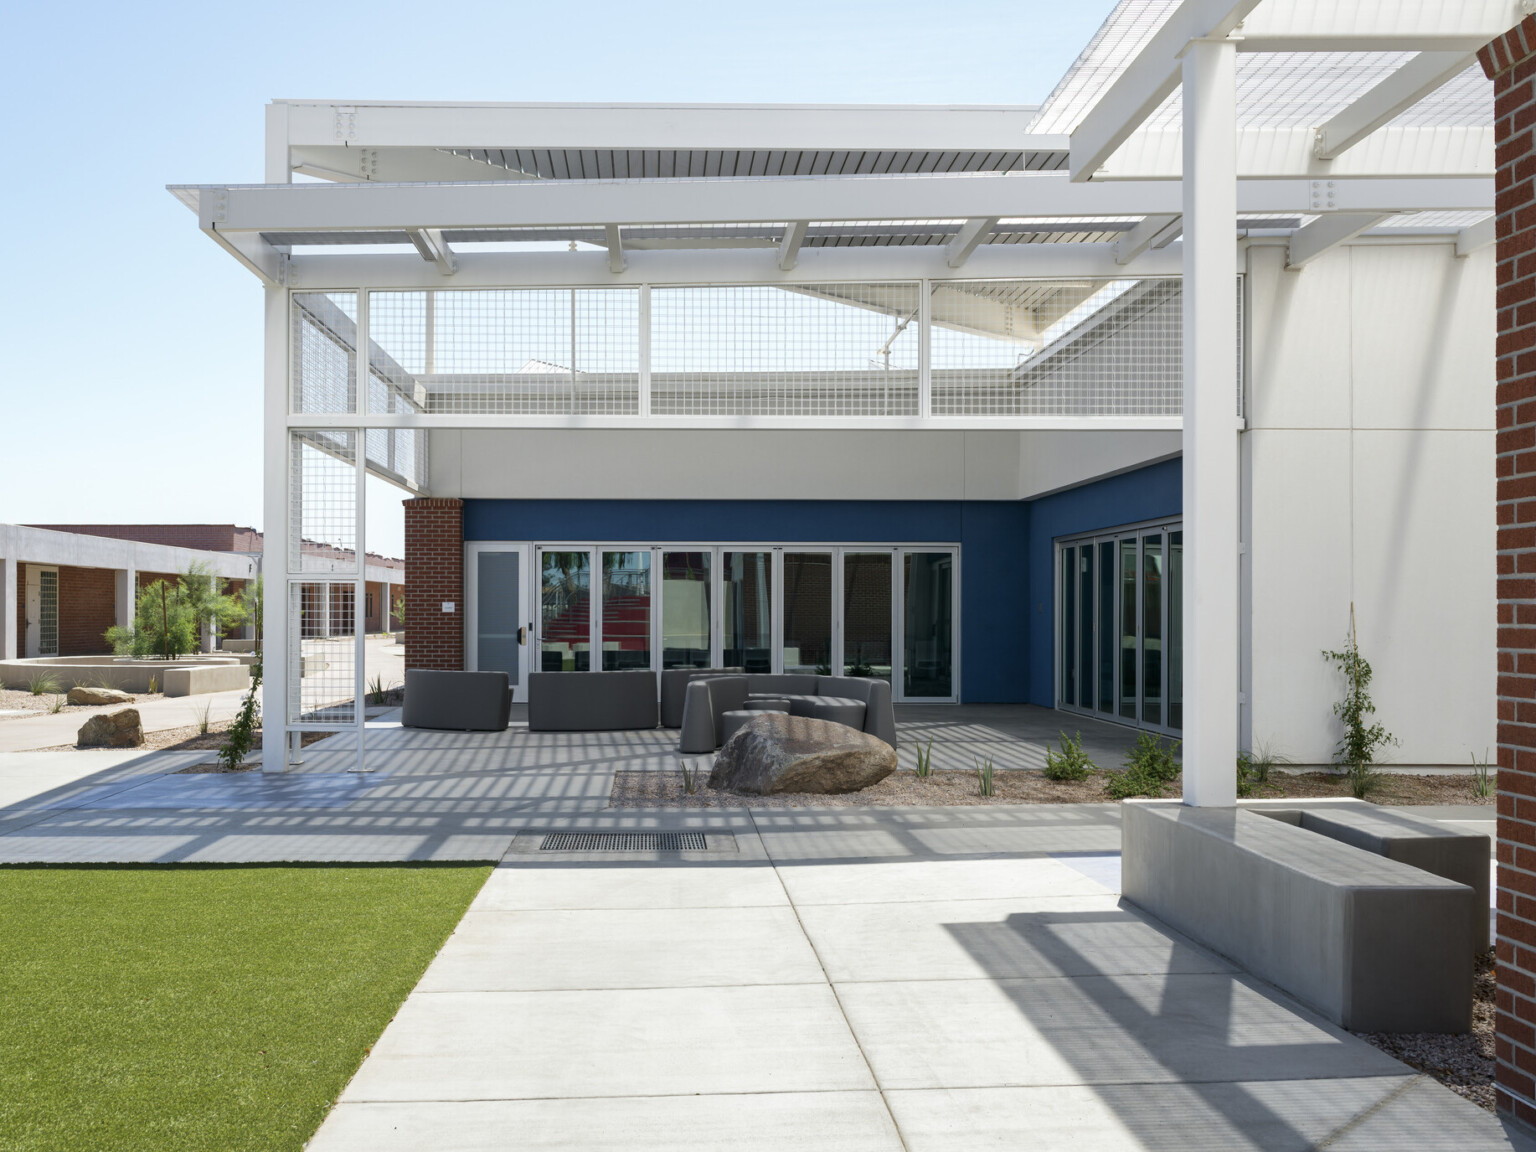 exterior of the quad, white building with white angular steel roof, concrete pathways and concrete outdoor seating, grass, landscaping